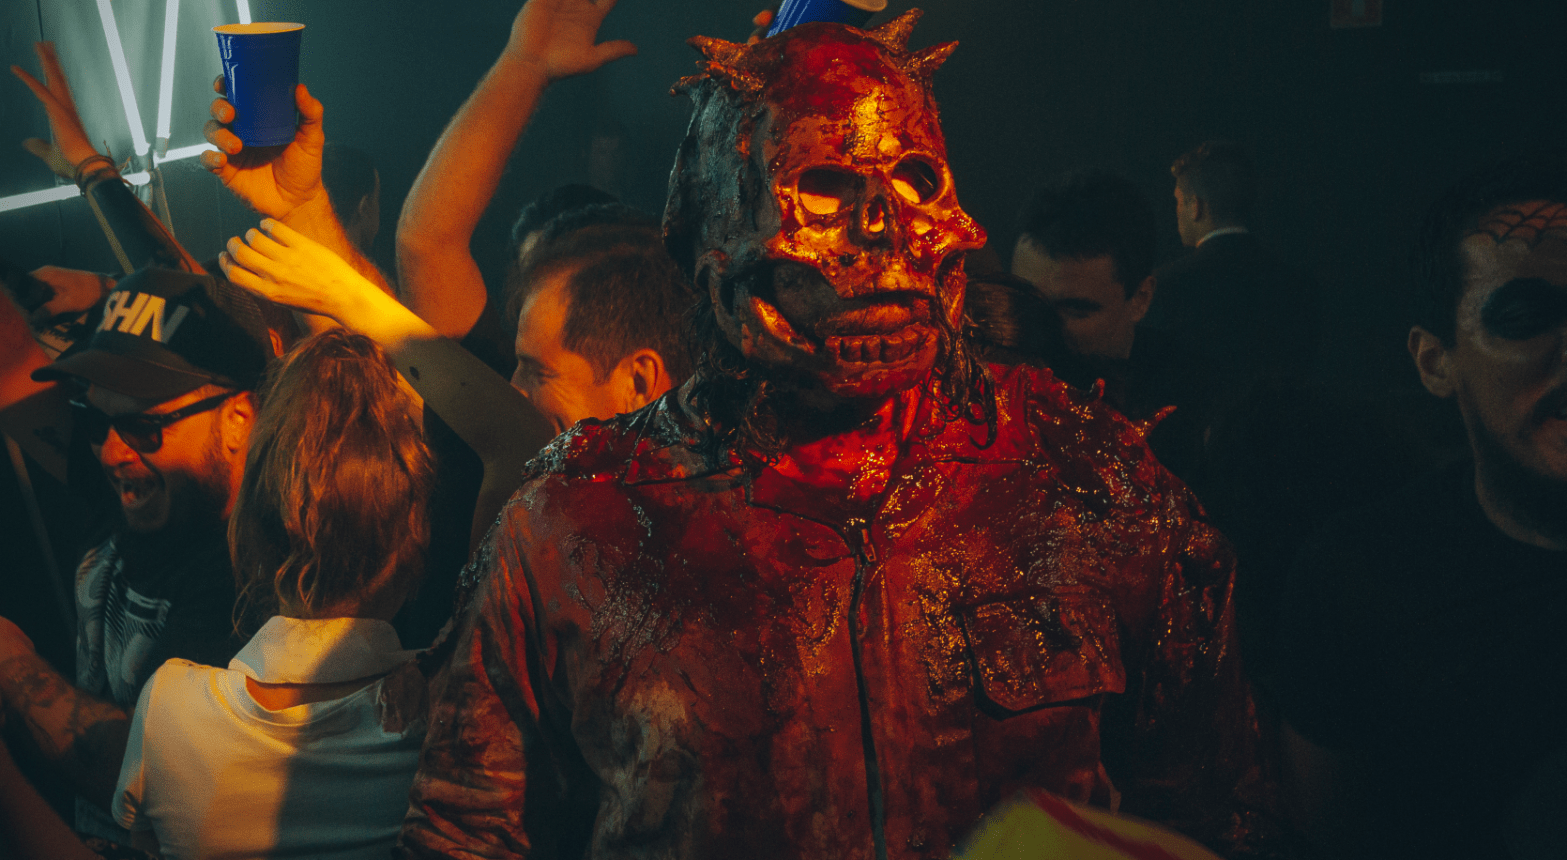 If you see this guy crashing your party... run! (Image: Lucas Kappaz/Shudder)